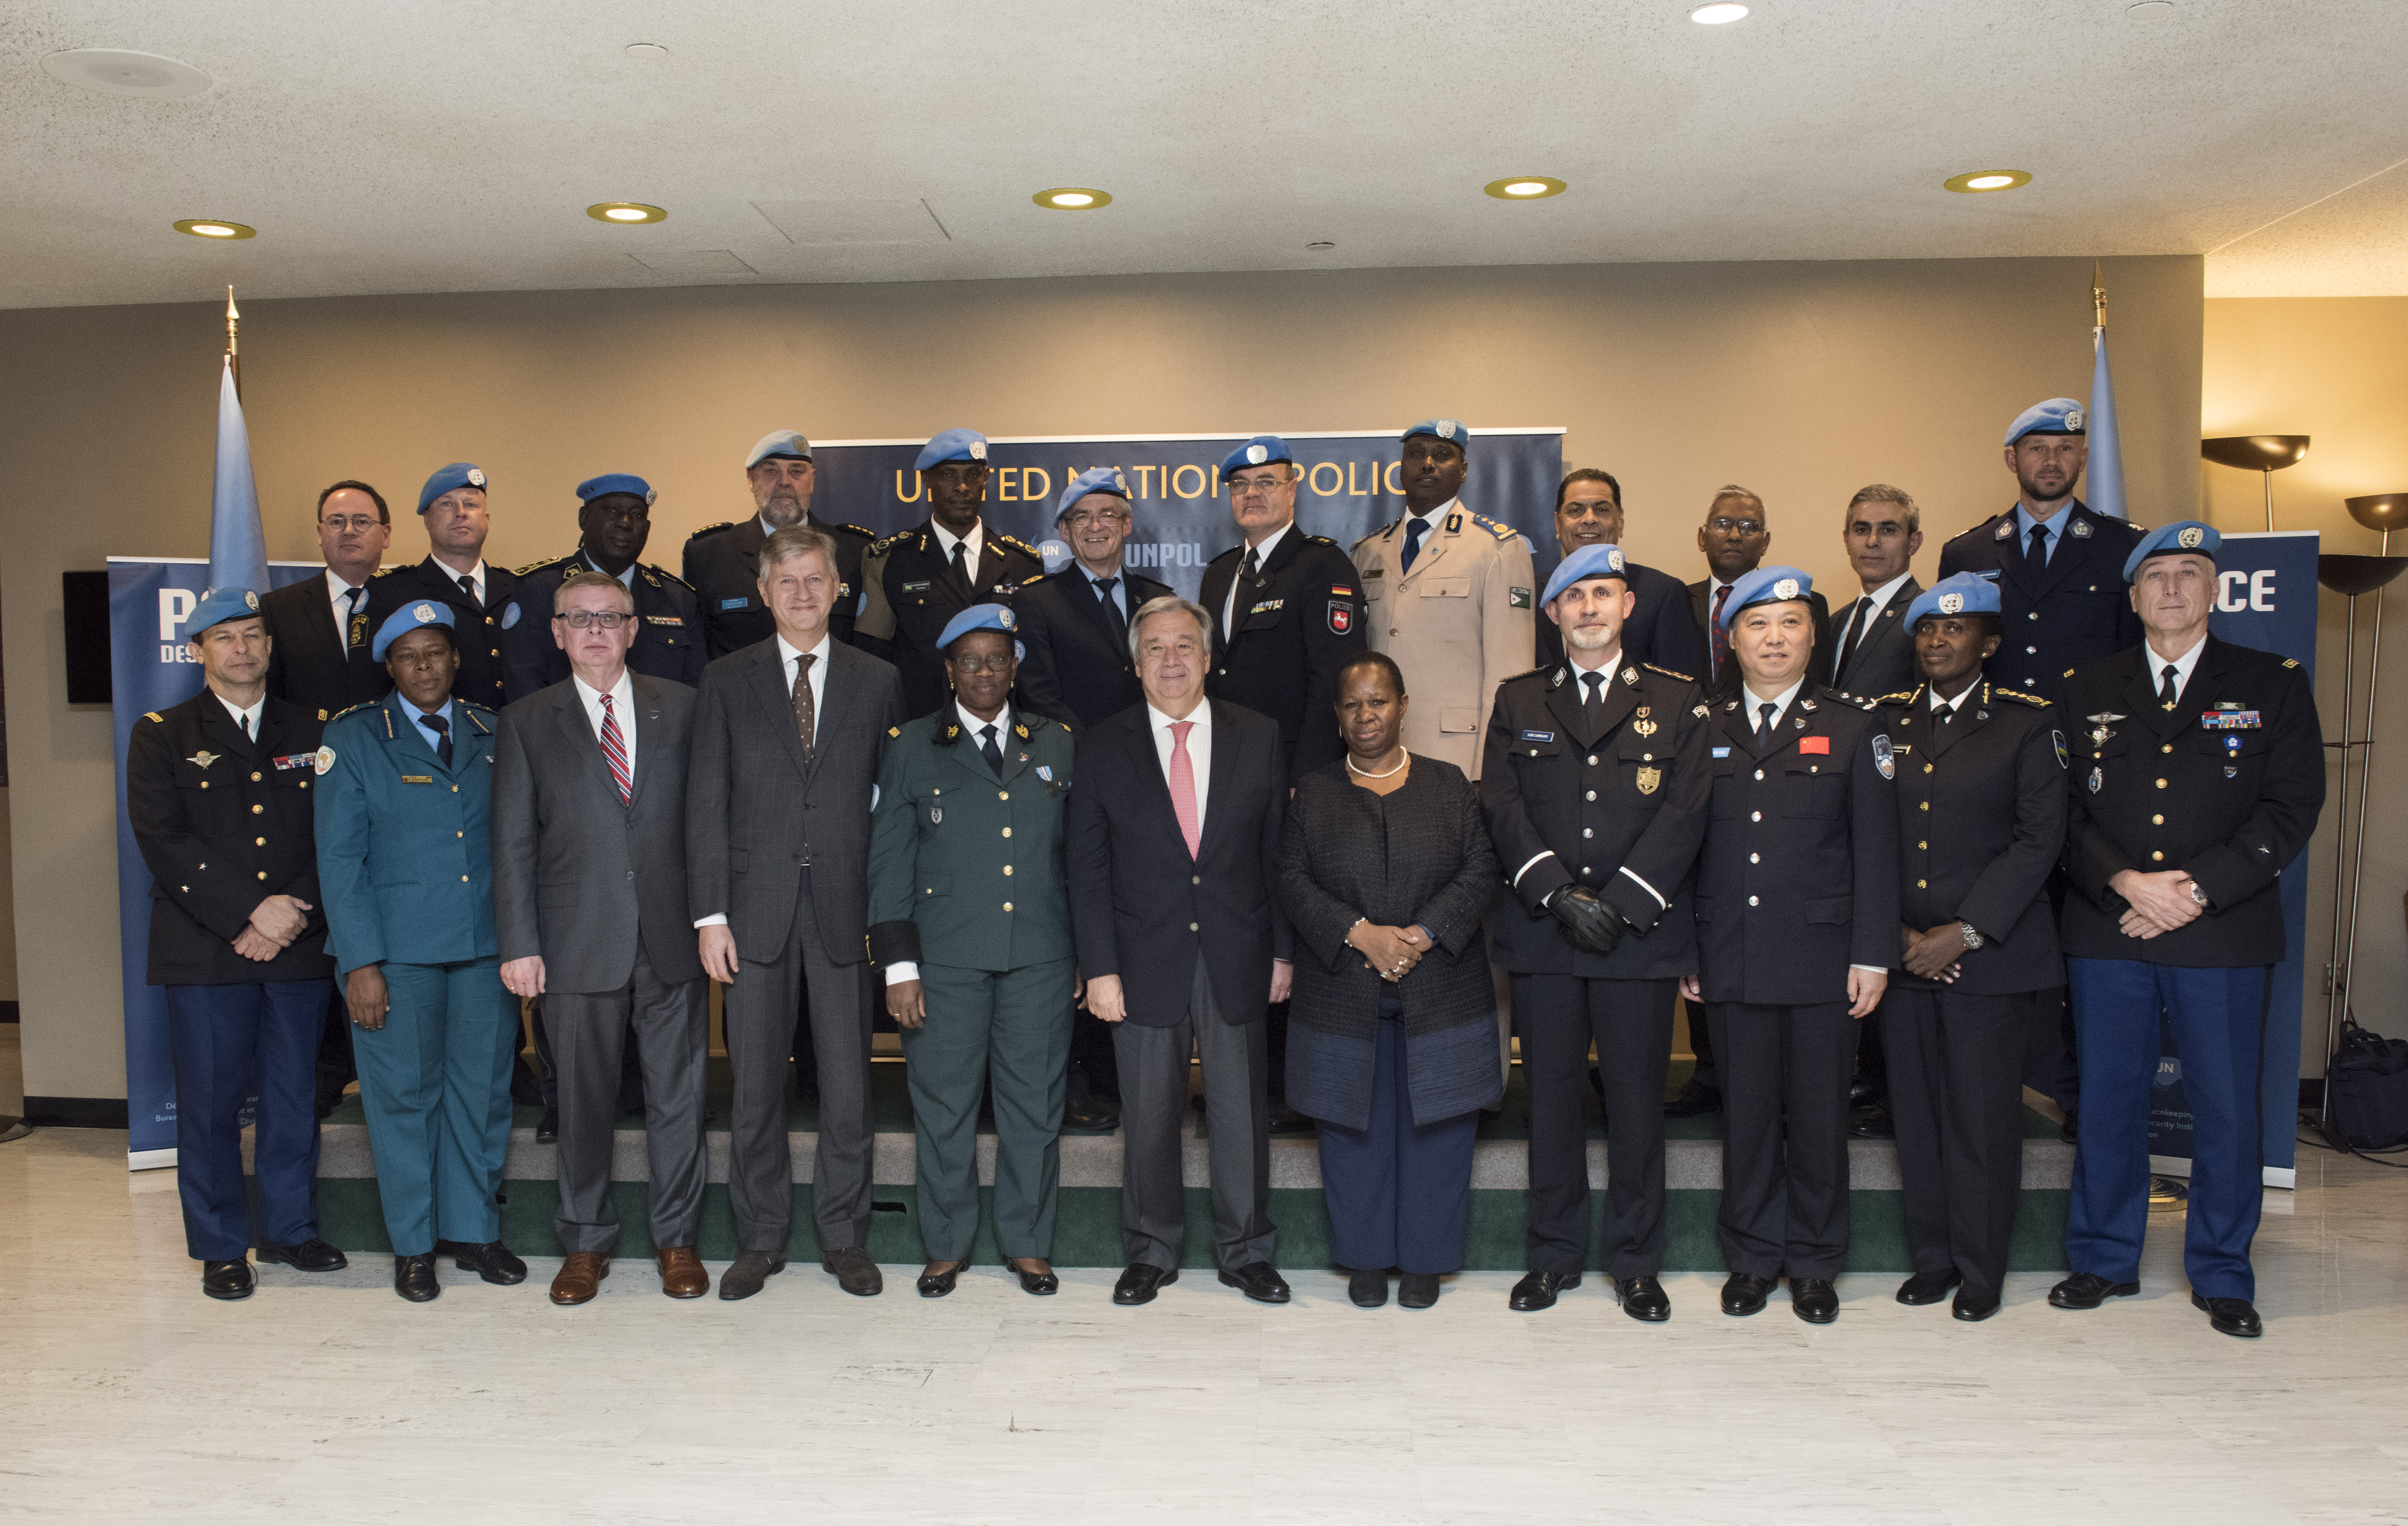 Secretary-General António Guterres (centre) meets with the Heads of United Nations Police (UNPOL) components on 9 November 2017. UN Photo/Kim Haughton